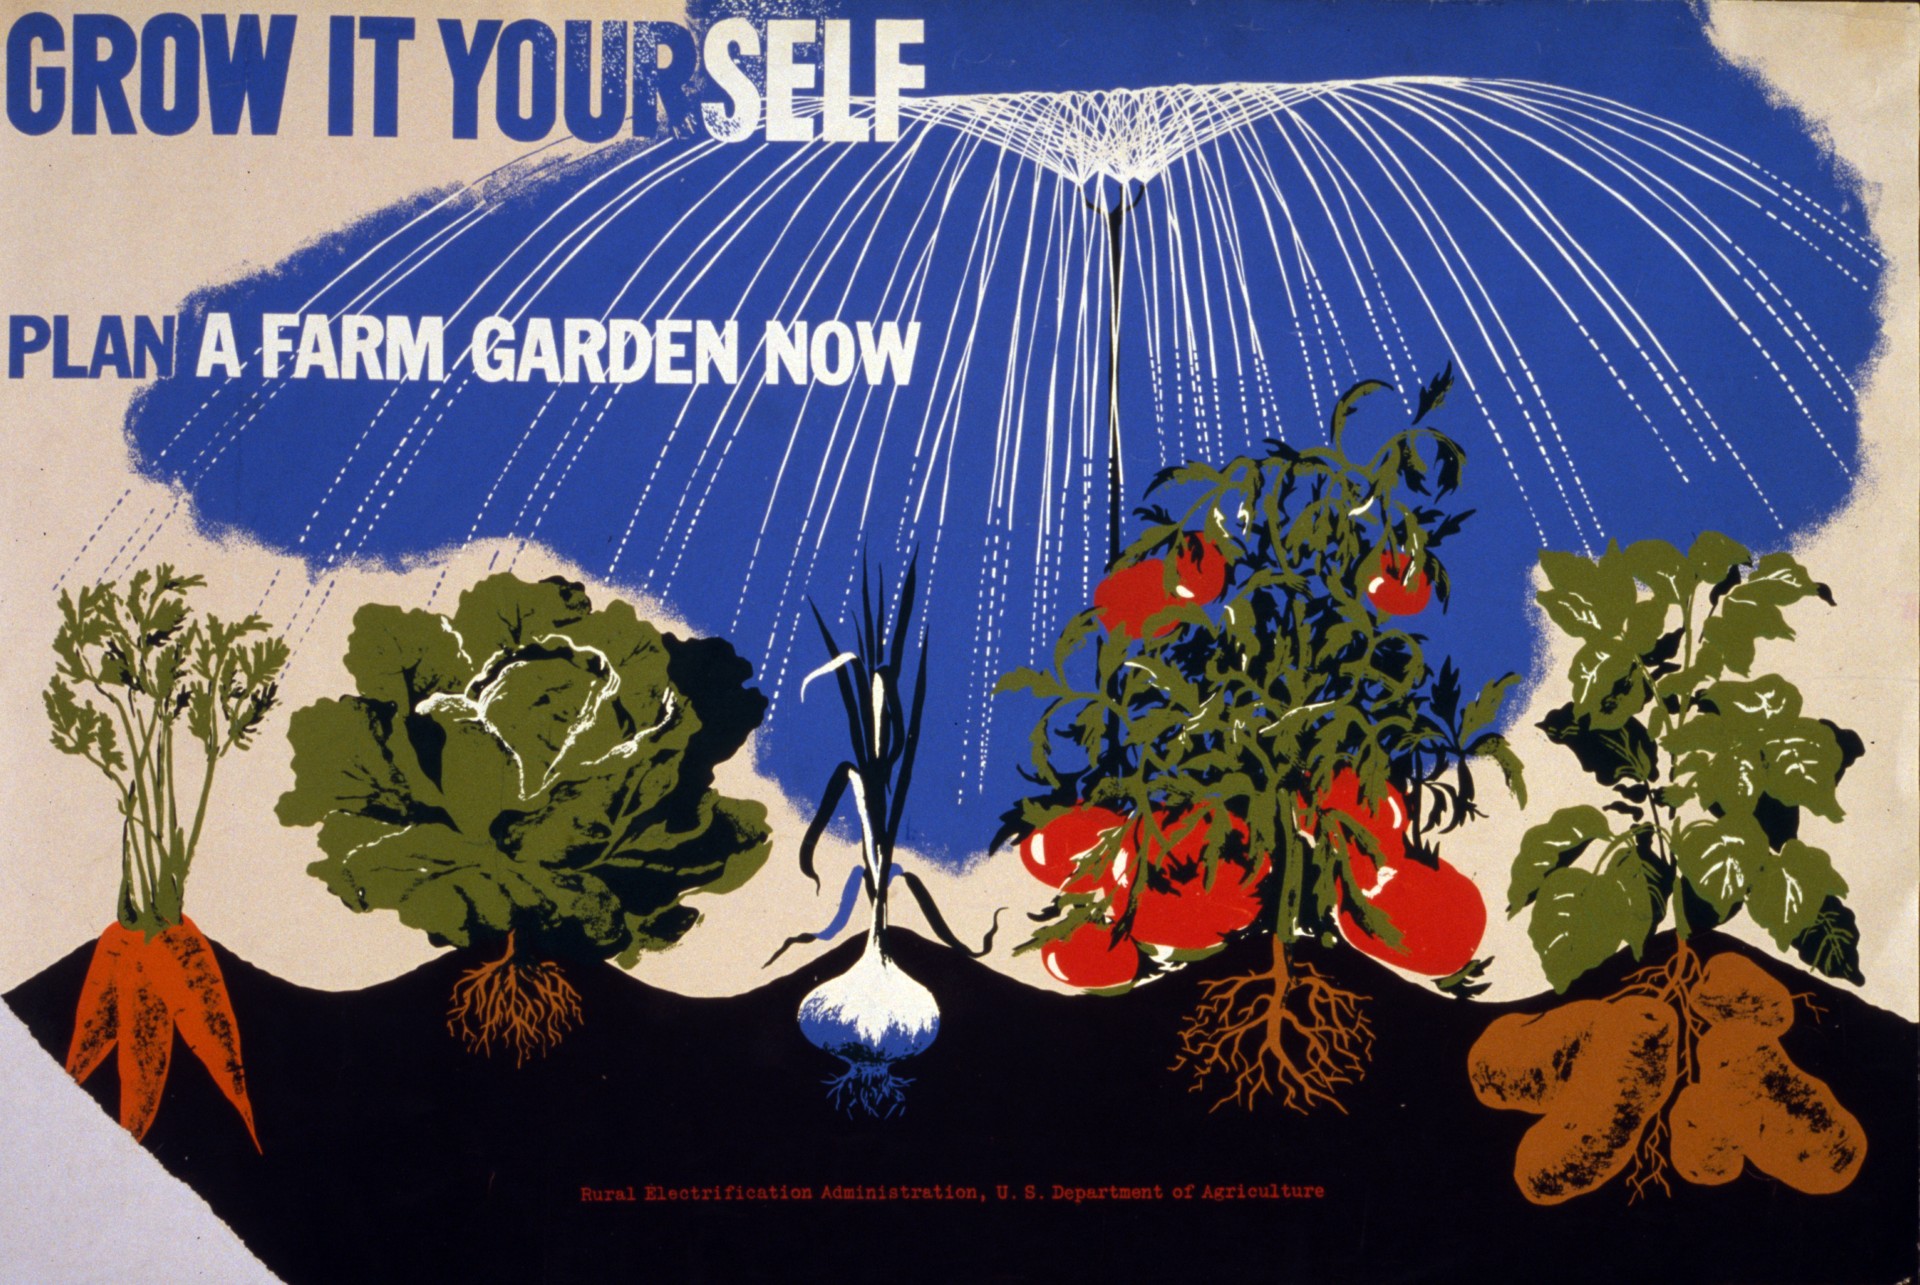 Public domain vintage poster encouraging people to grow their own vegetables